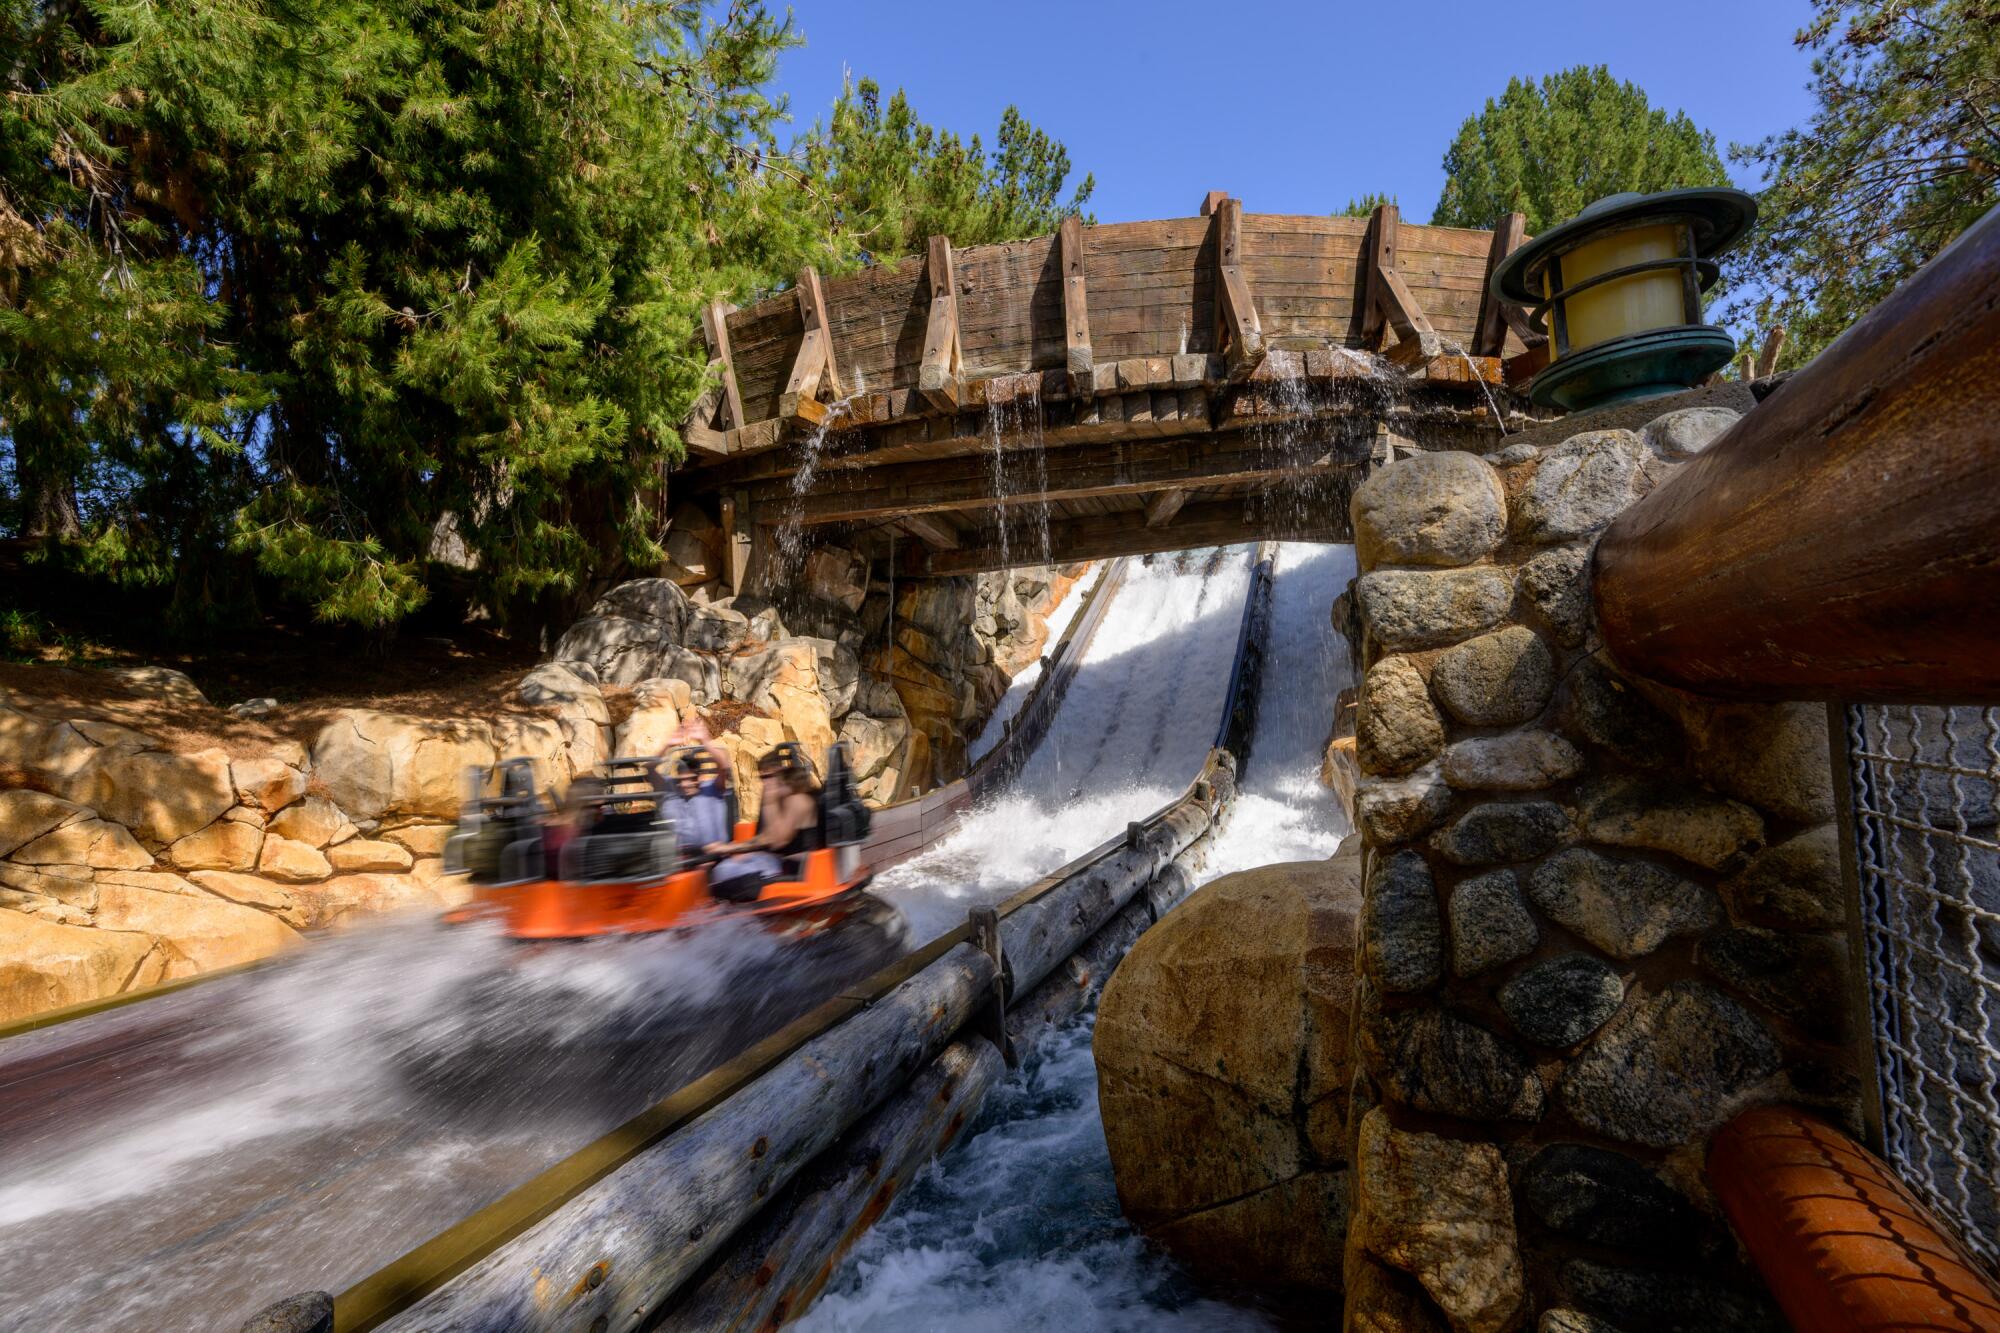 People on a raft in a California Adventure water ride bumping against a rock with rapid waters all around them